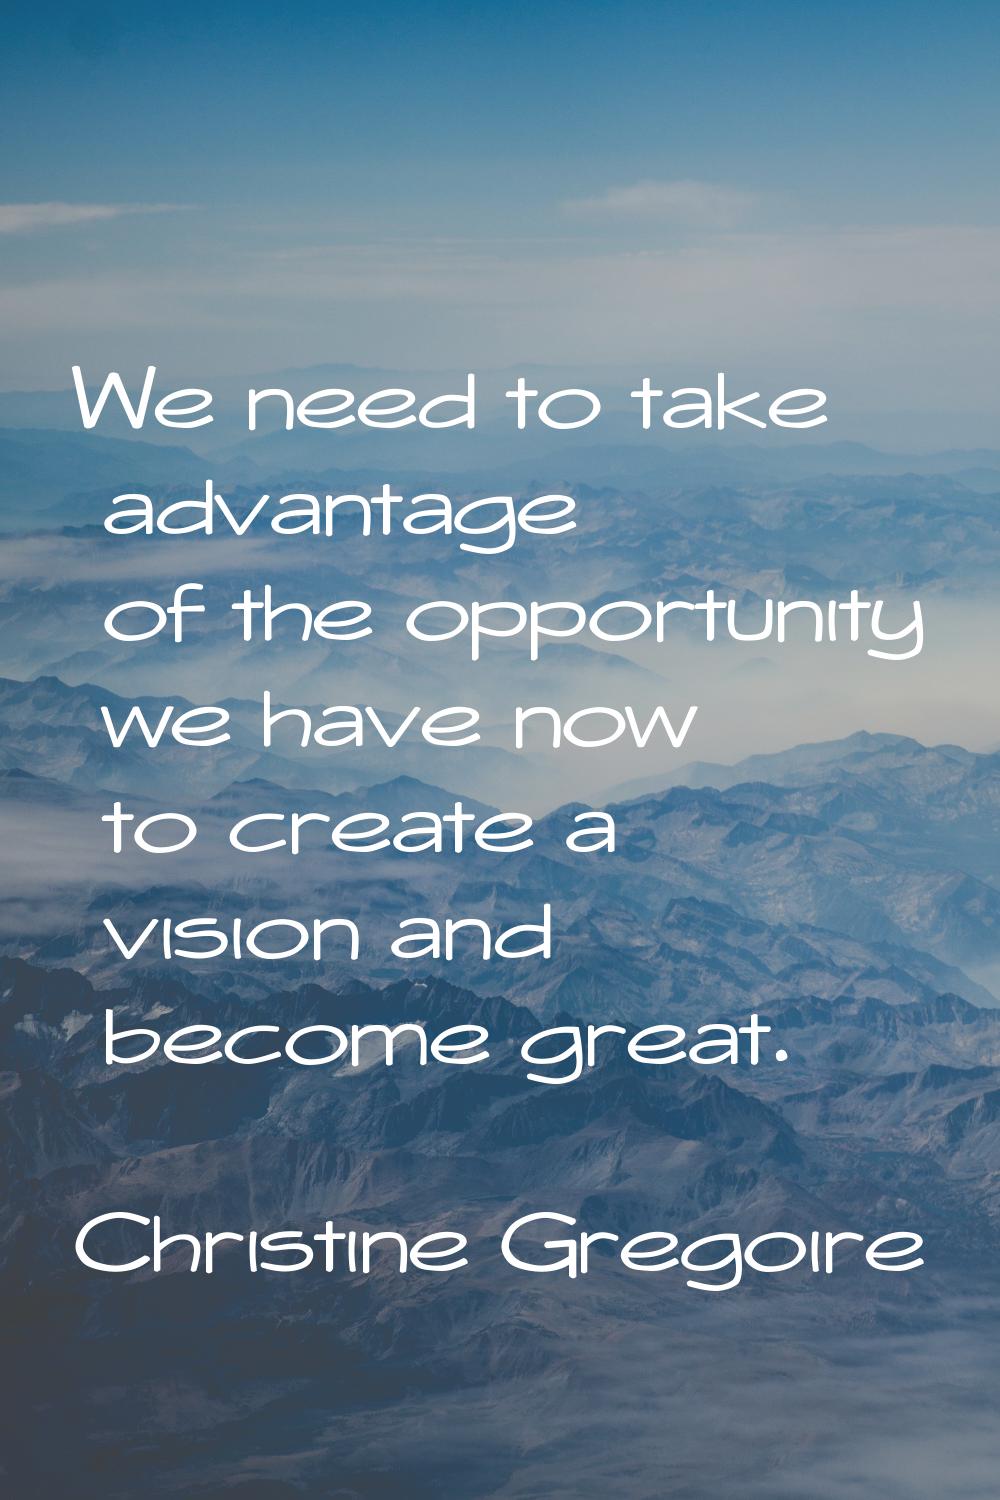 We need to take advantage of the opportunity we have now to create a vision and become great.